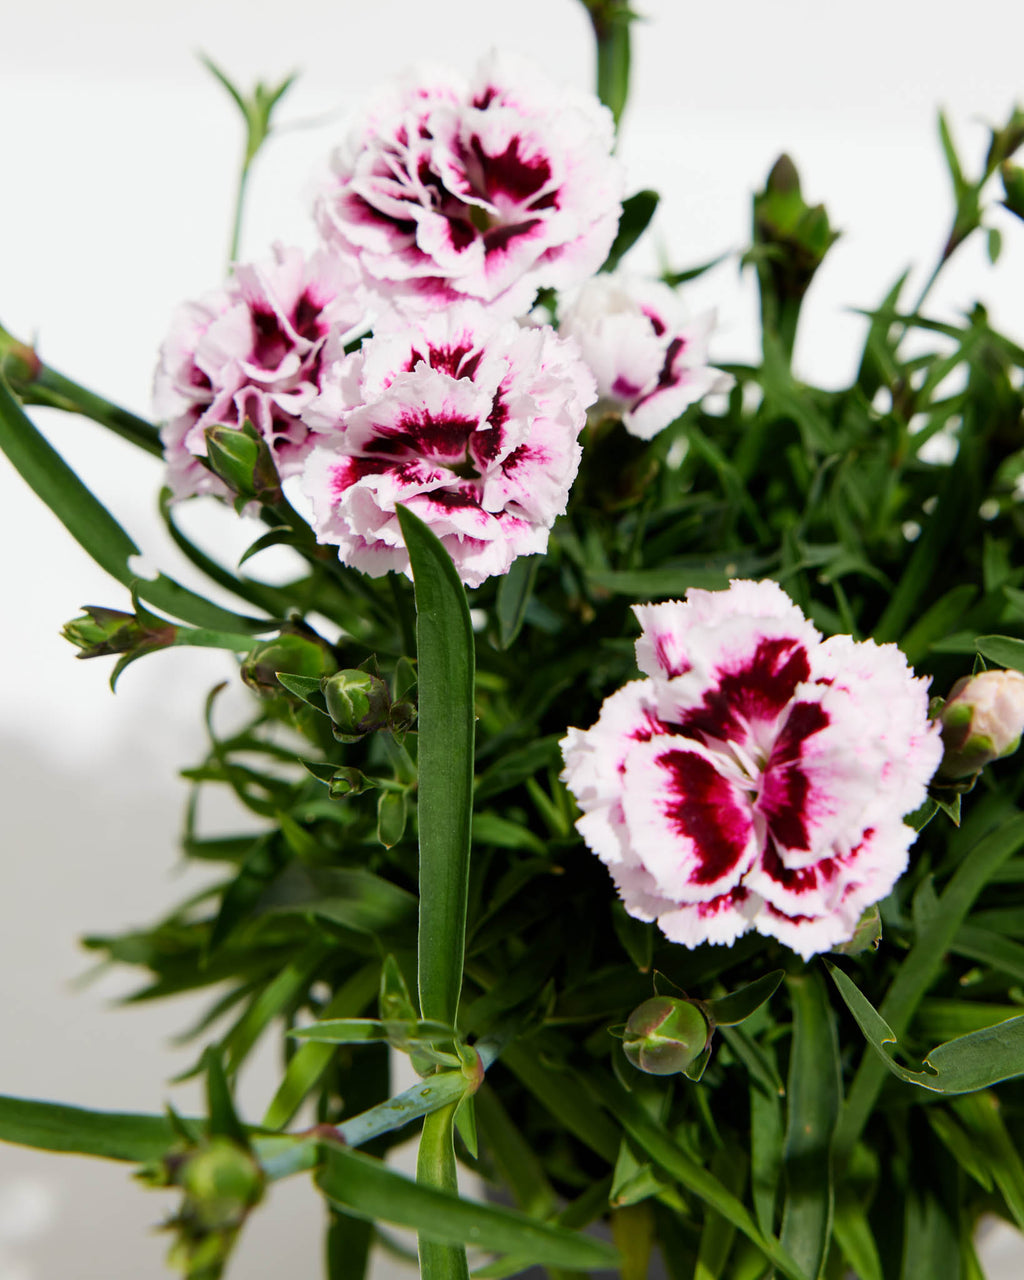 How to Grow and Care for Carnations